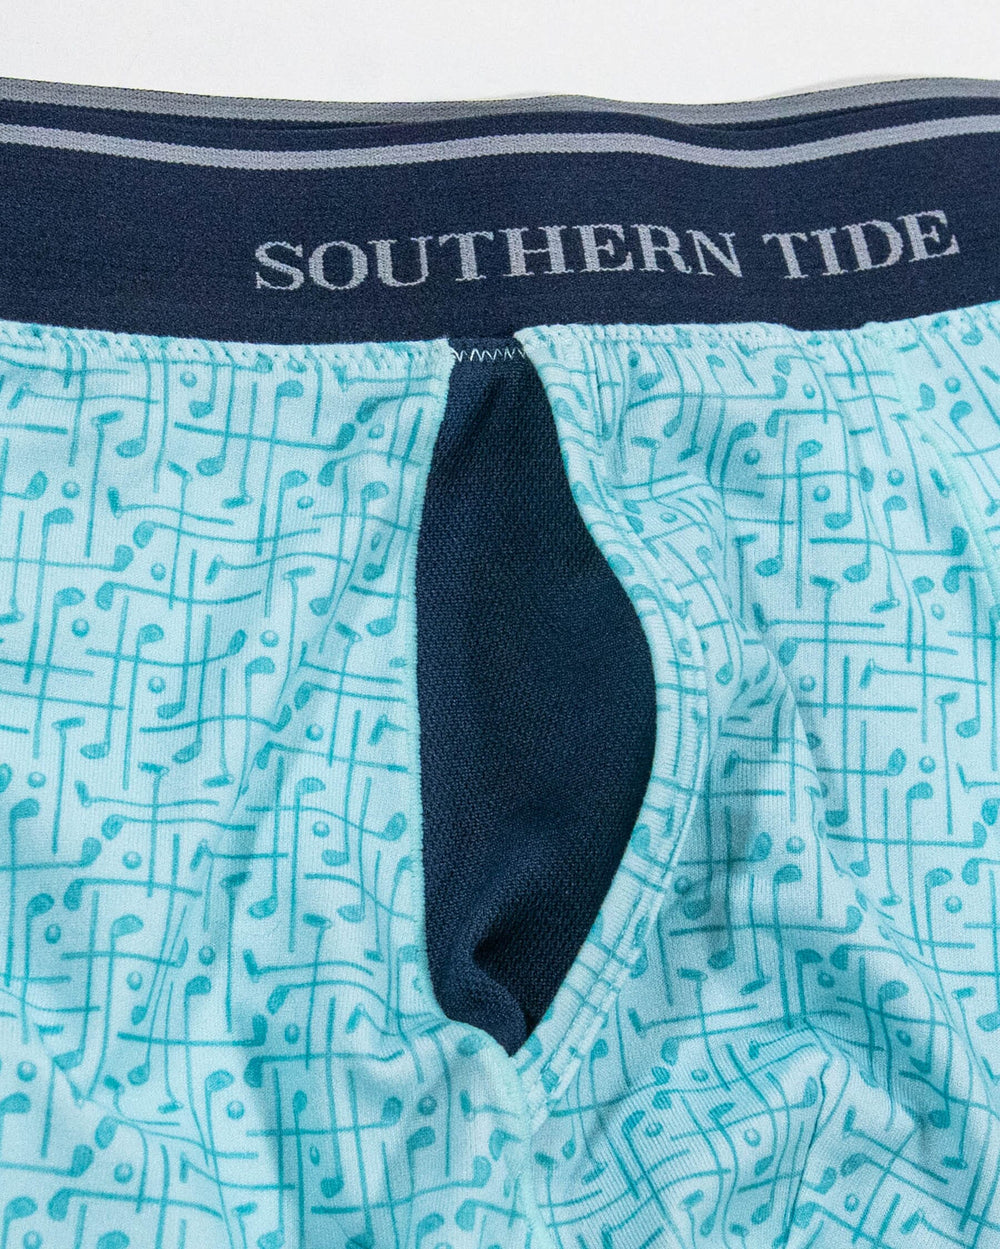 The detail view of the Southern Tide Over Clubbing Baxter Boxer Brief by Southern Tide - Baltic Teal